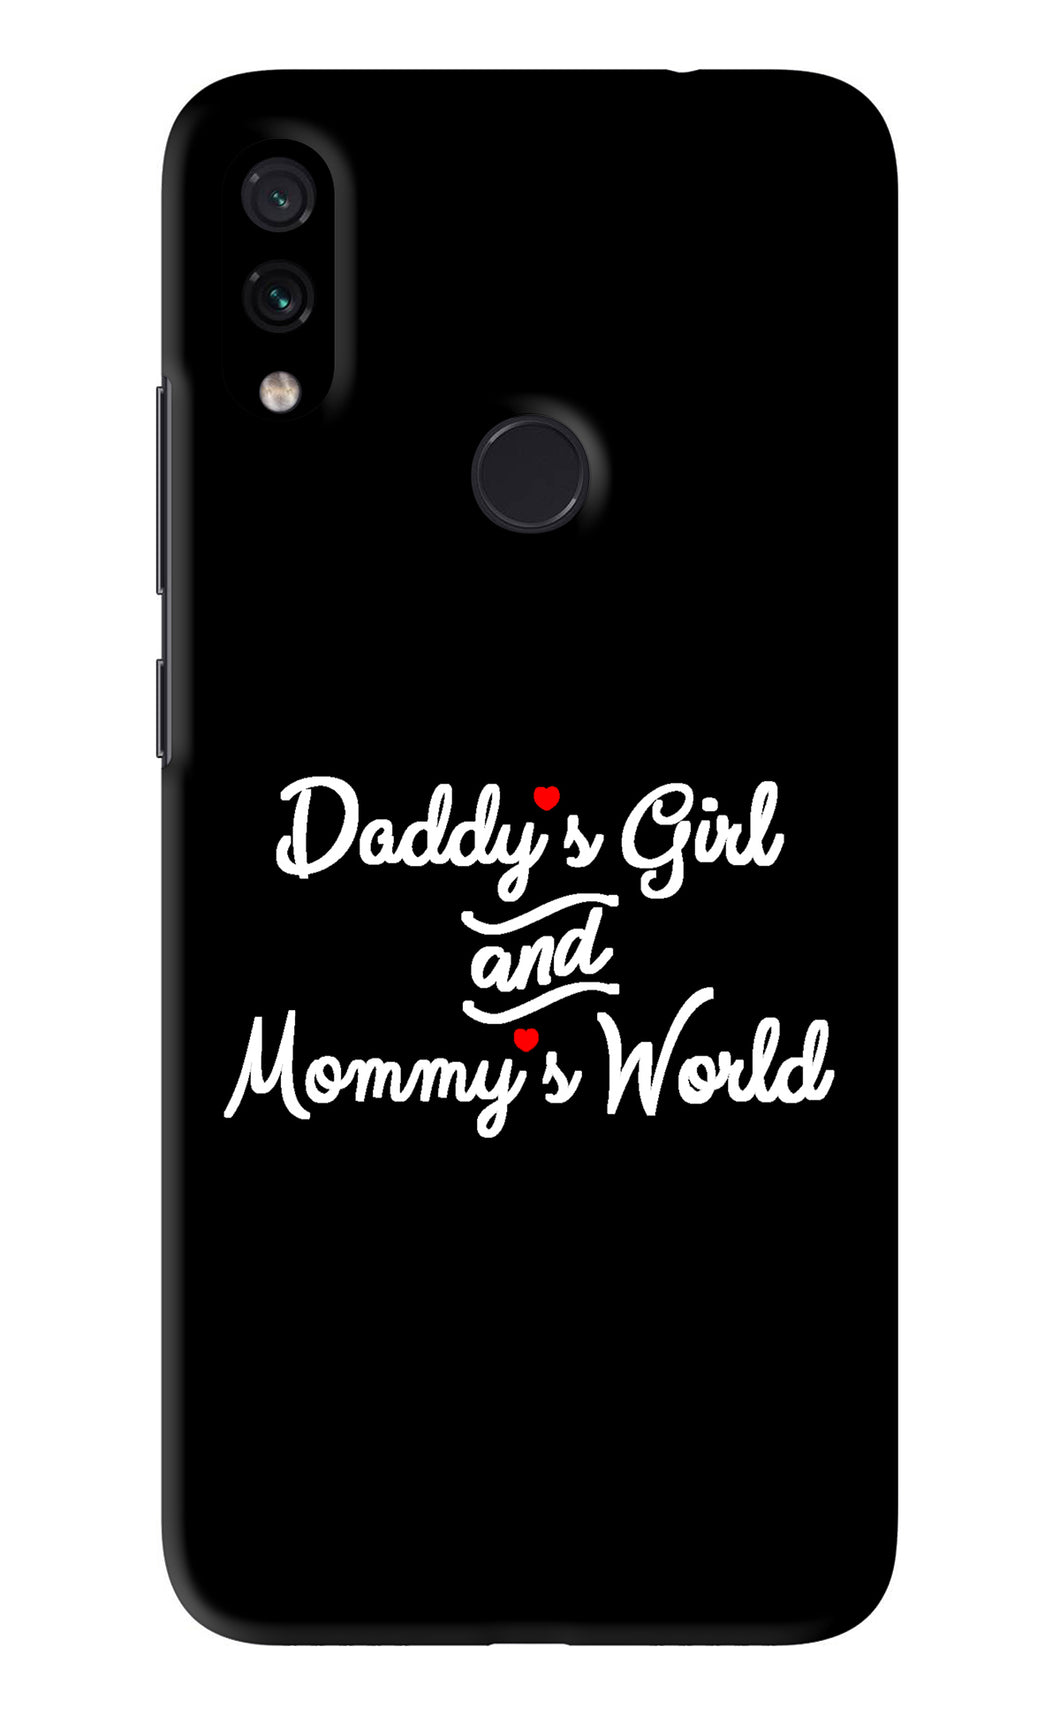 Daddy's Girl and Mommy's World Xiaomi Redmi Note 7 Back Skin Wrap